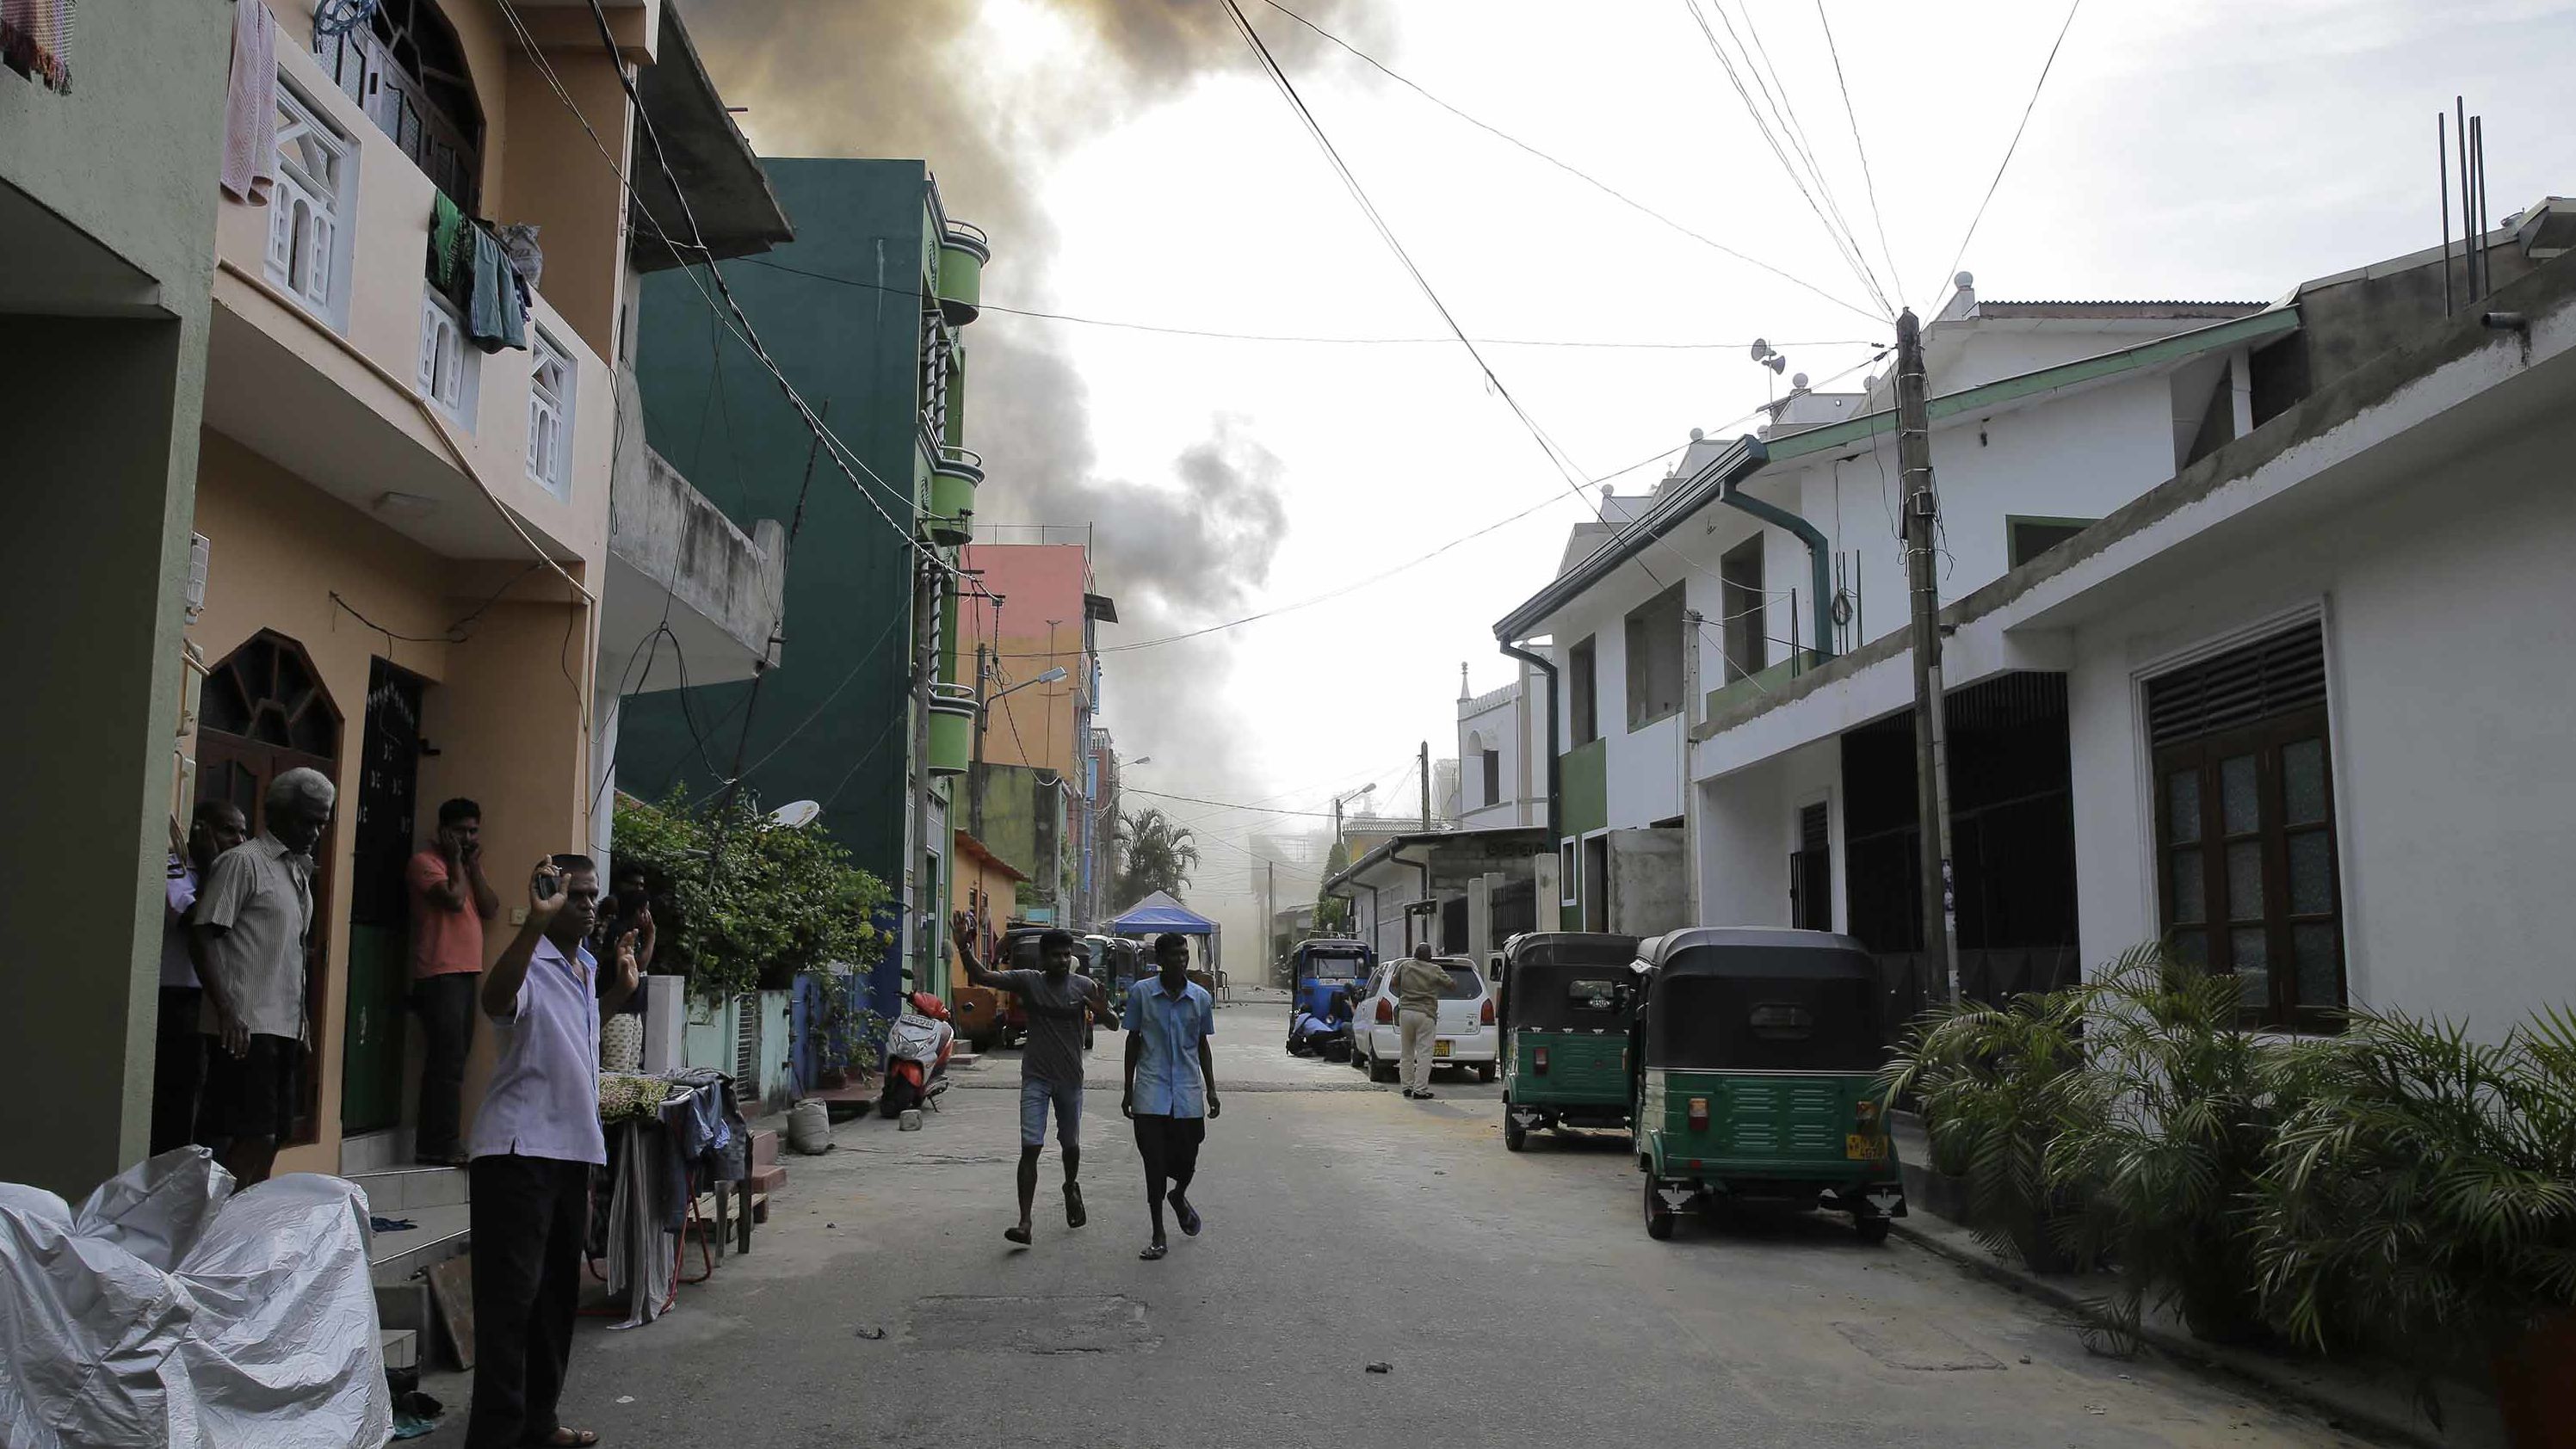 Smoke rises from the area where a van exploded on Monday near St. Anthony's shrine in Colombo.